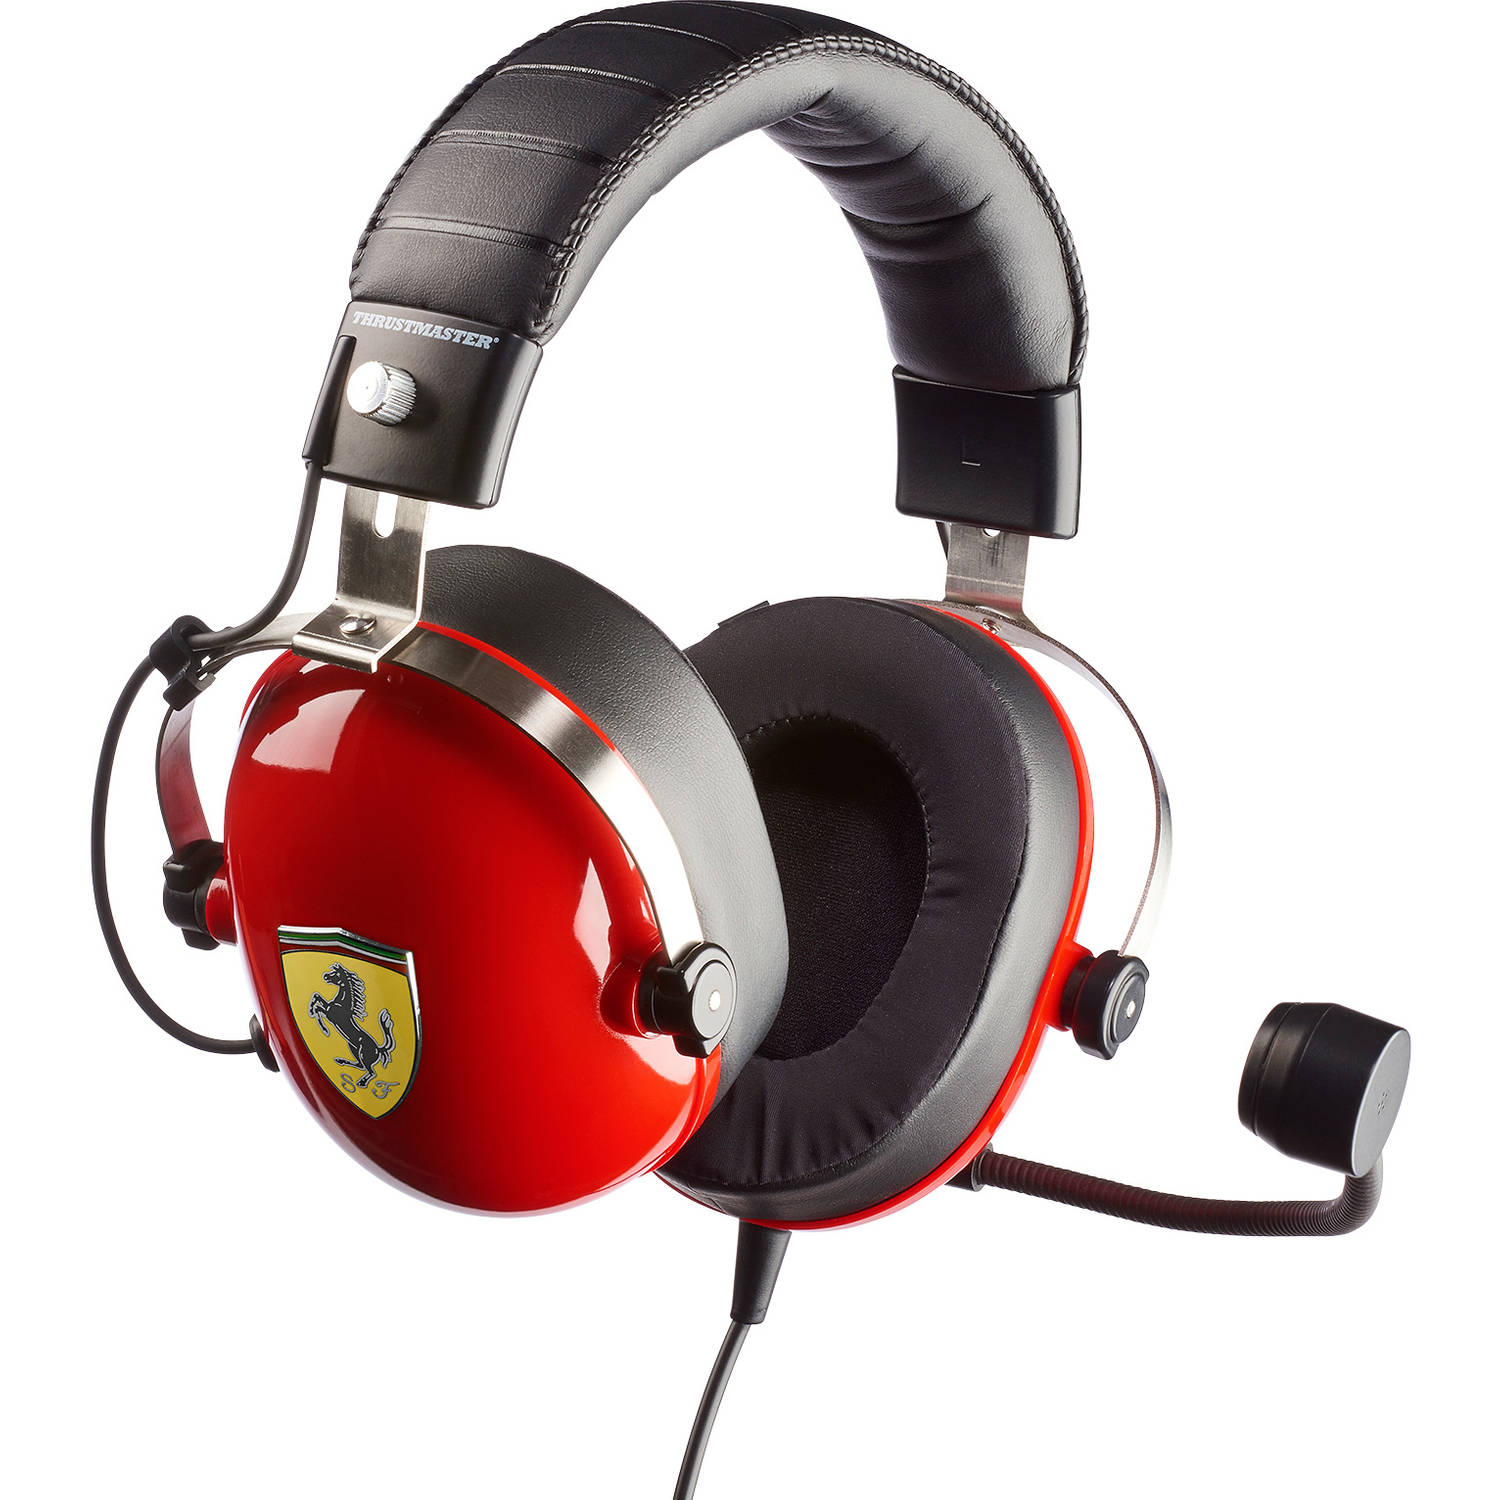 Thrustmaster T.Racing Scuderia Ferrari Edition Wired Gaming Headset (PC/PS4/Xbox One)